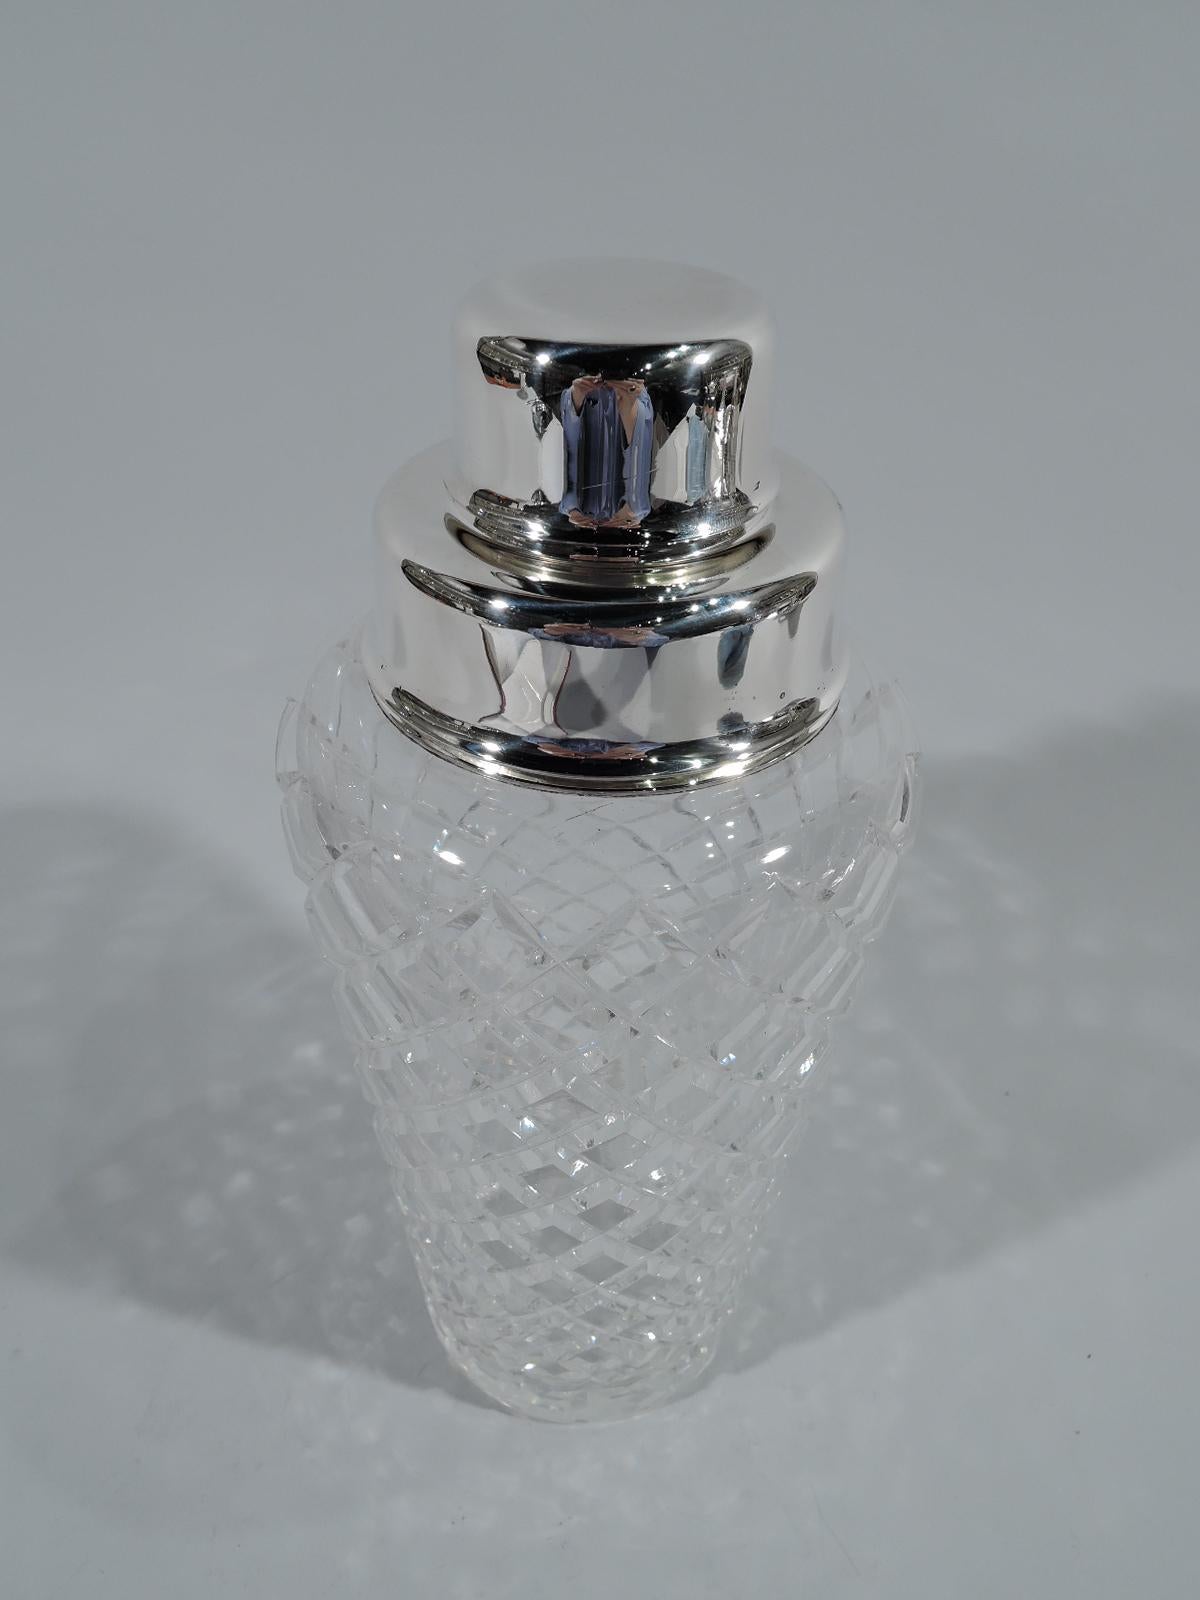 Mid-Century Modern sterling silver and cut-glass cocktail shaker. Made by Tiffany & Co. in New York. Clear glass cup with textural and easy-grip faceted diaper pattern. Short neck with sterling silver collar. Cover also sterling silver with built-in